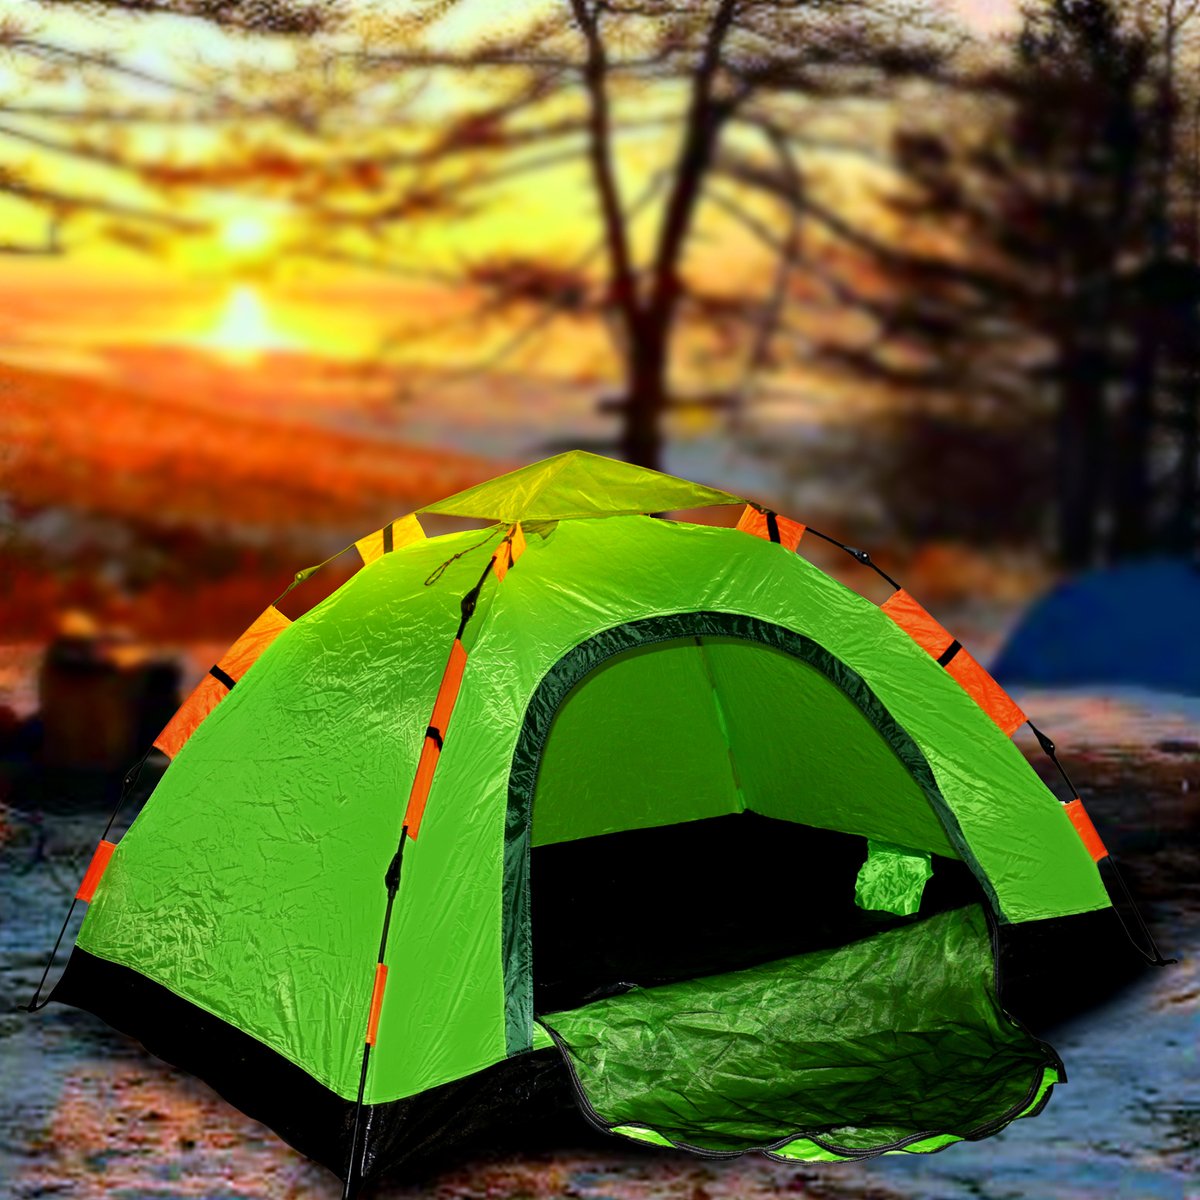 Campmate Automatic Tent 2 Person, Green, 075